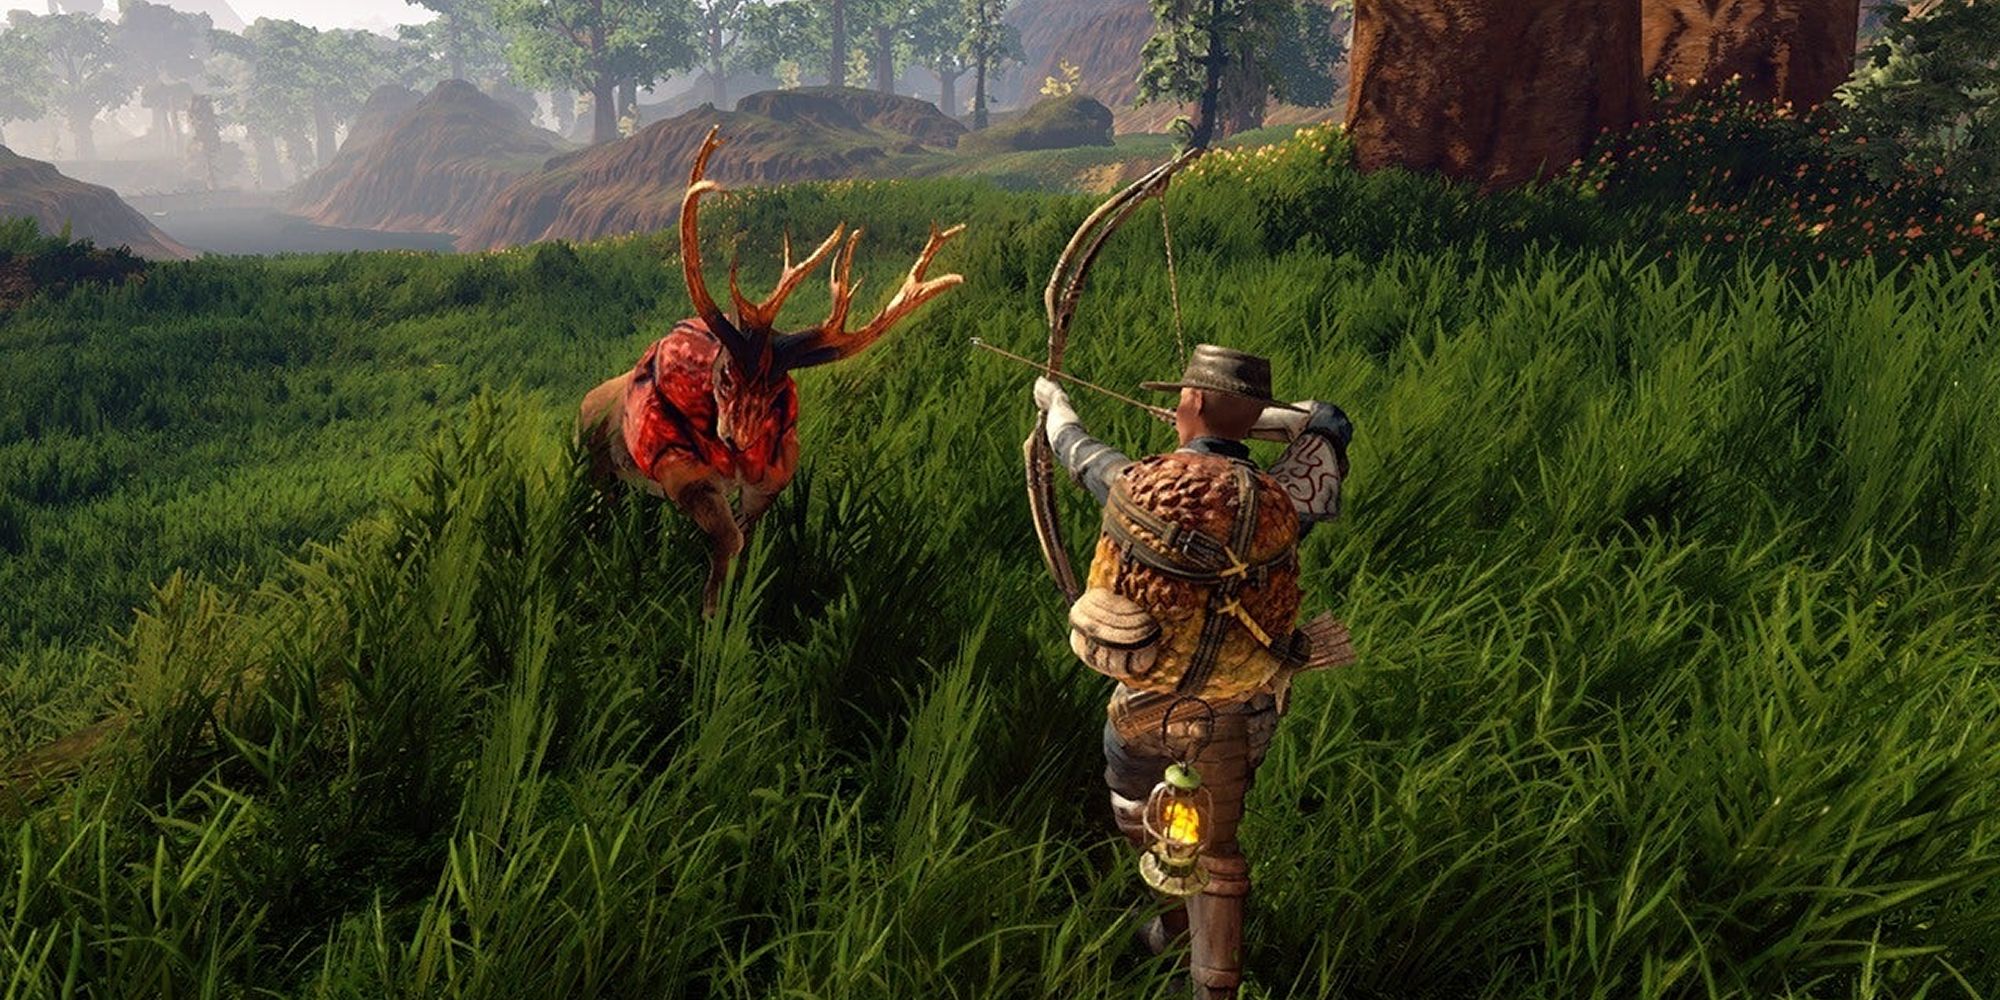 A Hero Hunts A Glowing Red Stag